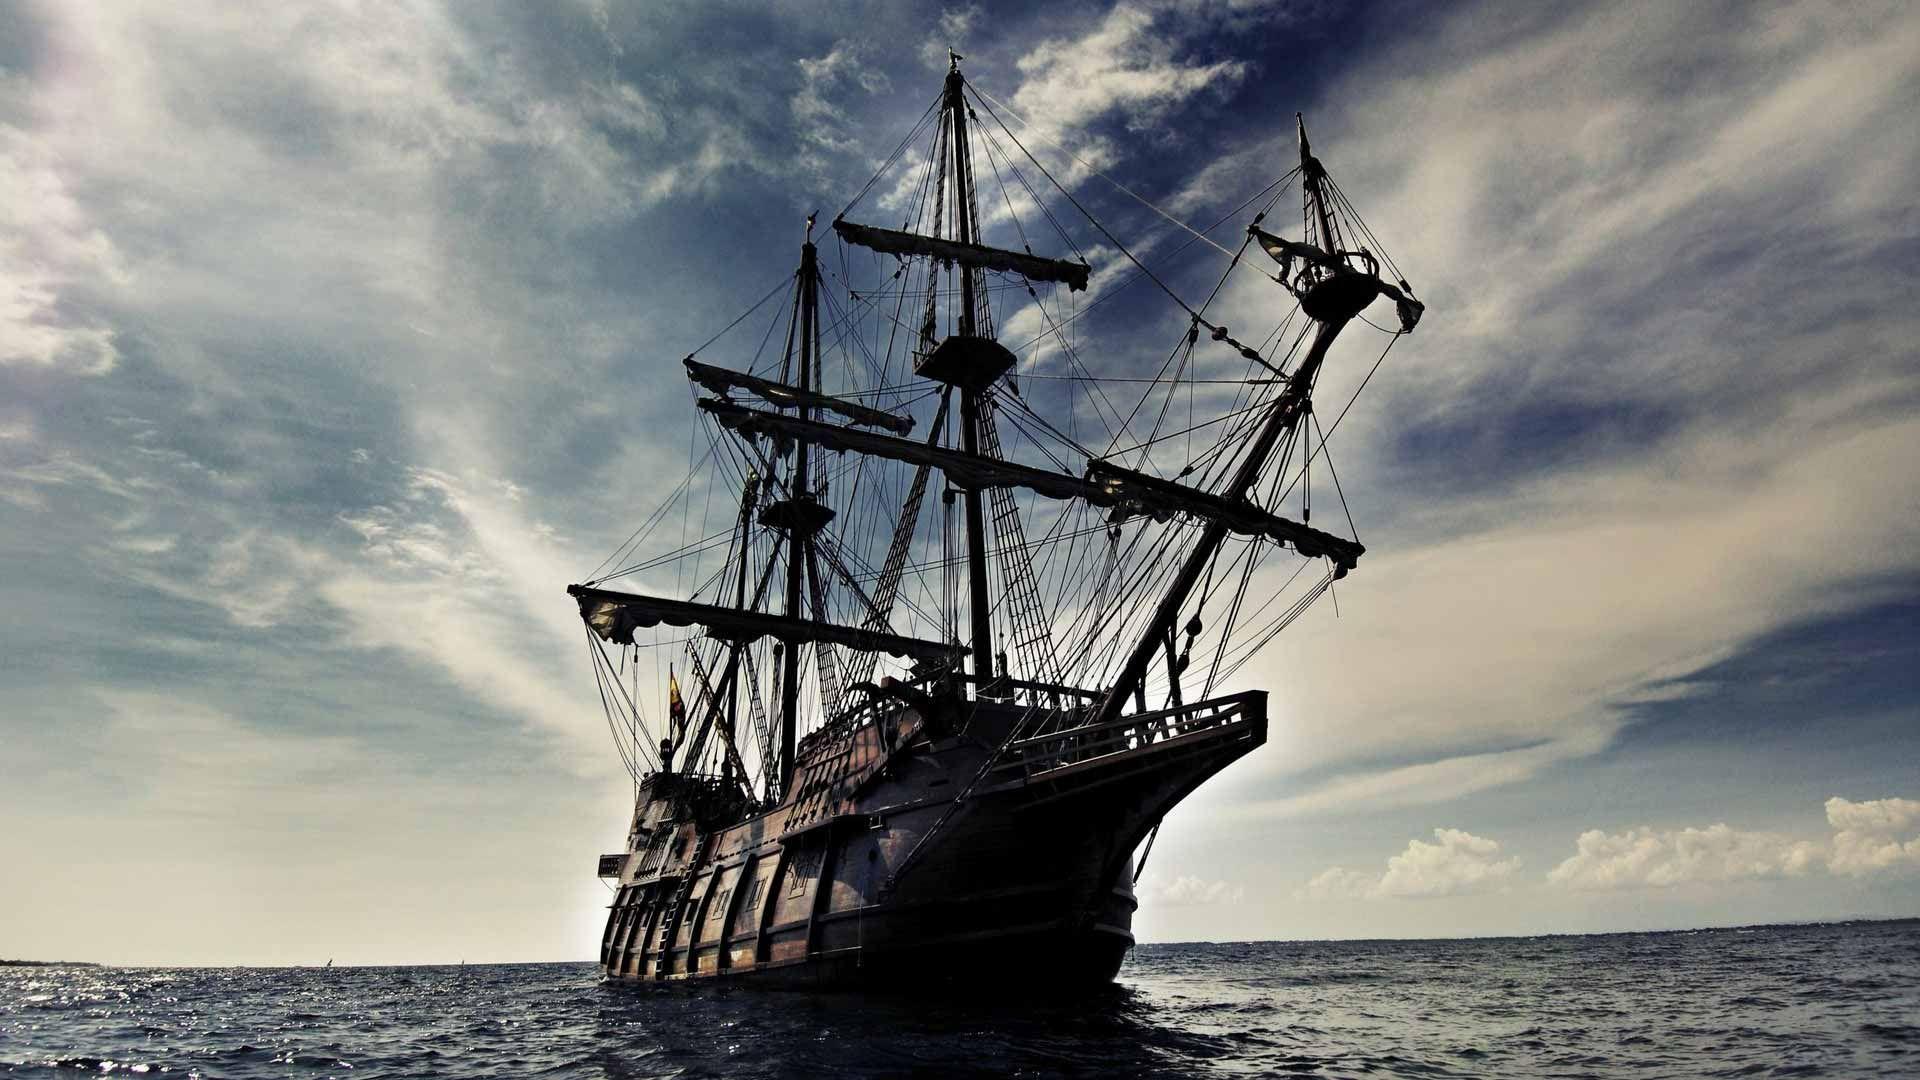 Pirate Ship Deck Wallpapers - Top Free Pirate Ship Deck Backgrounds ...